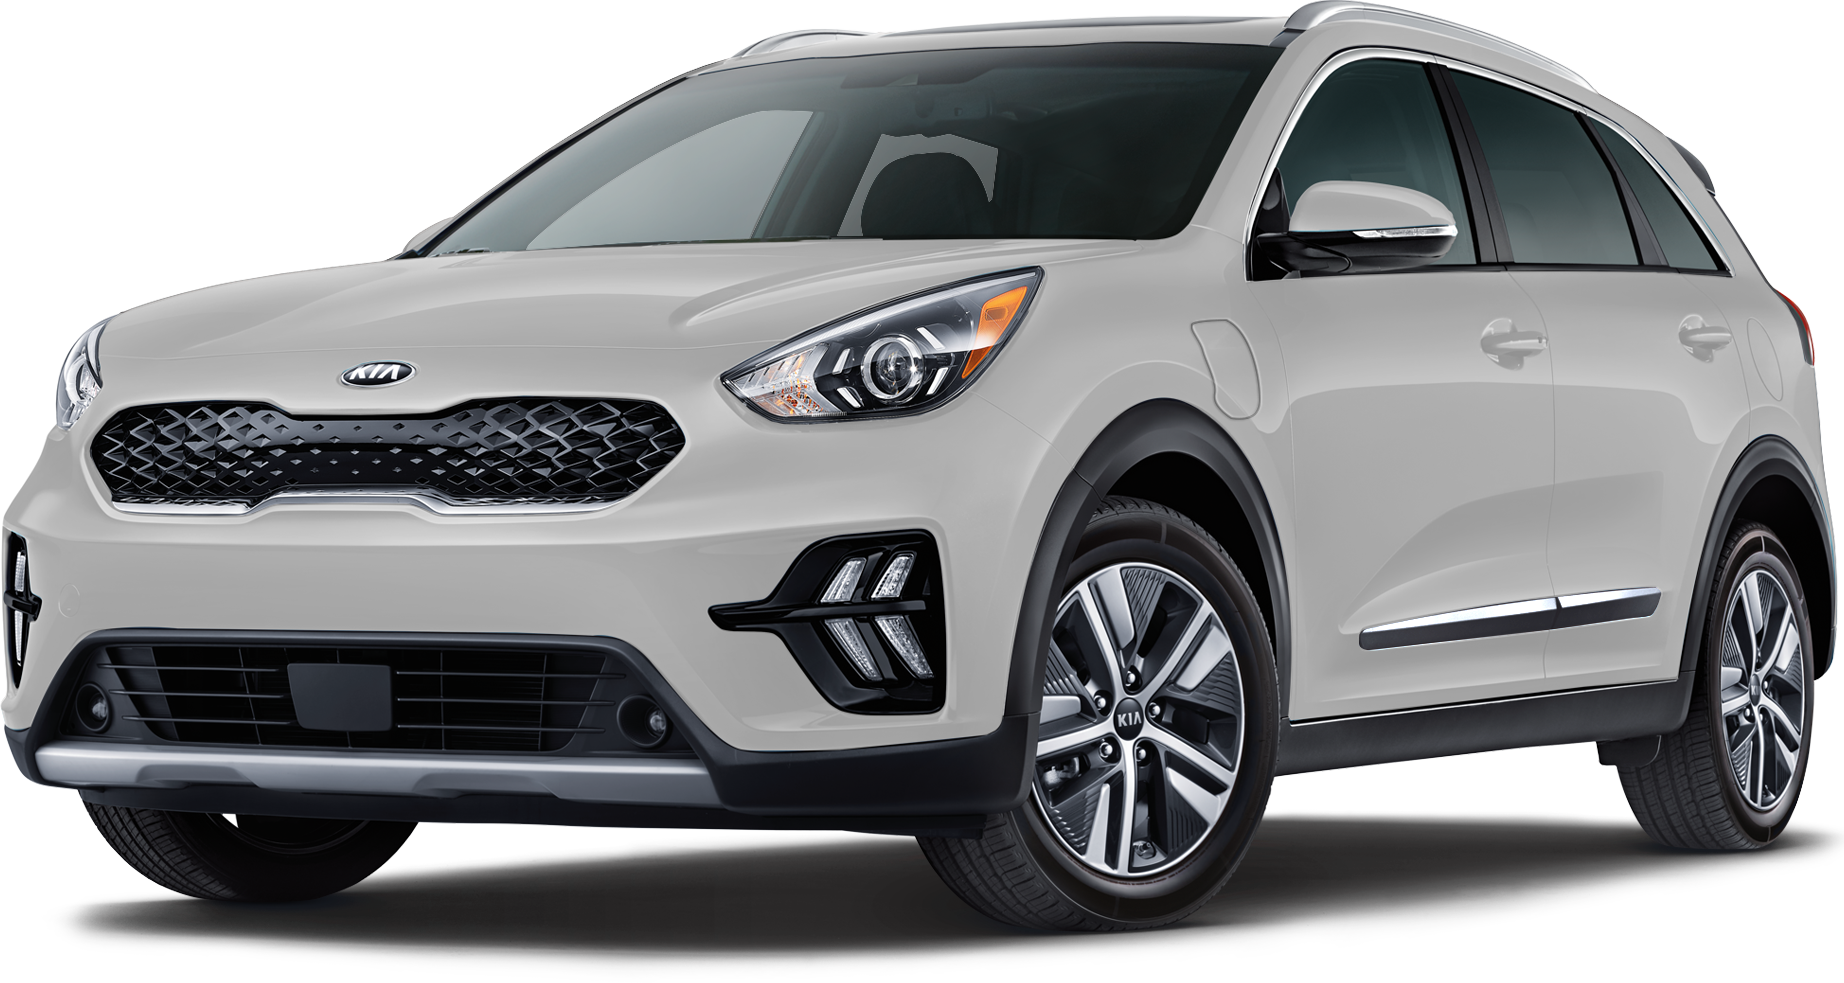 2020-kia-niro-plug-in-hybrid-incentives-specials-offers-in-rockville